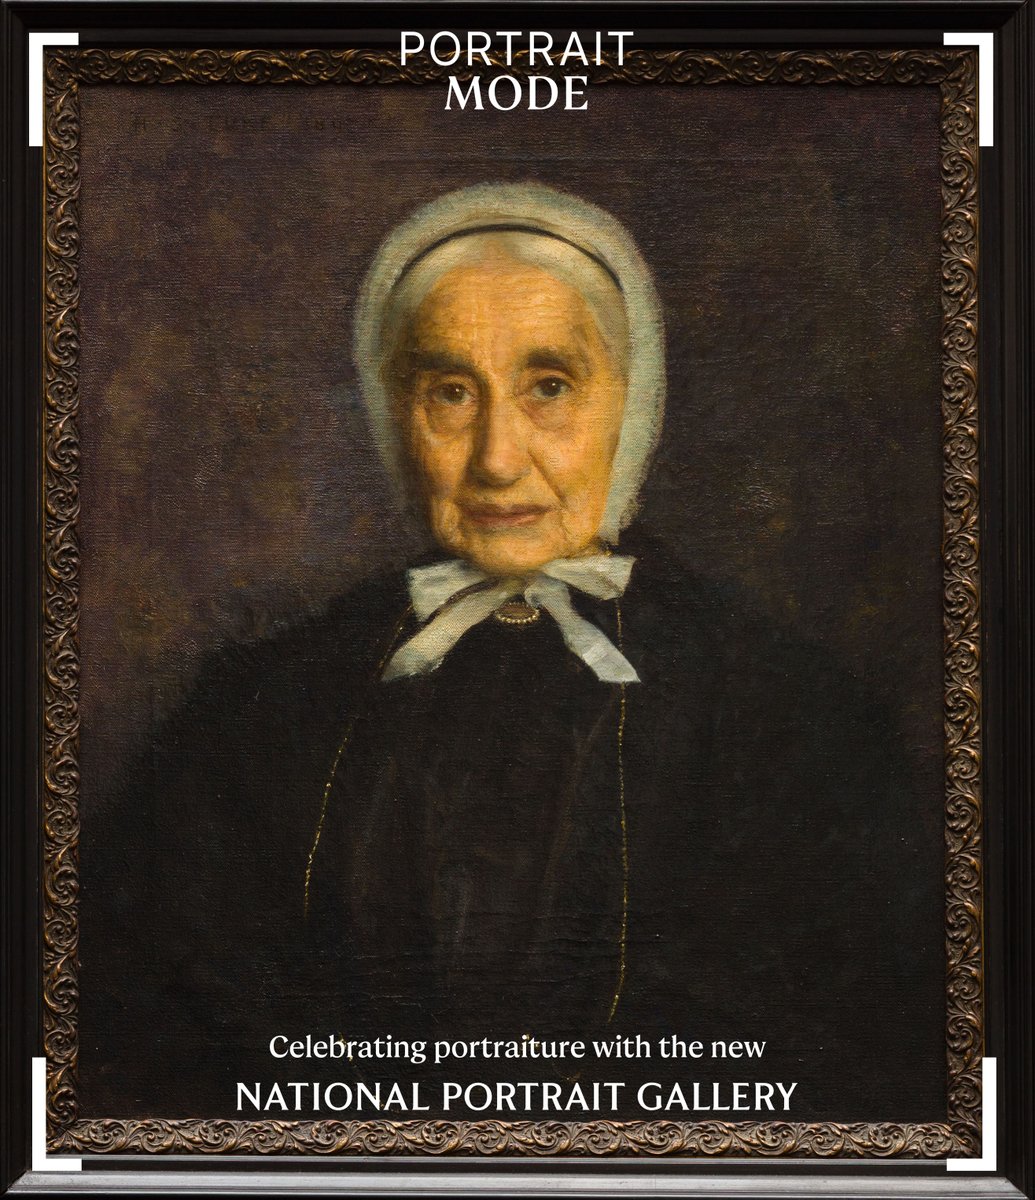 We are celebrating #InternationalPortraitDay and the reopening of @NPGLondon with a portrait of Anna Maria Fox by Henry Scott Tuke. Anna Maria, an advocate of Cornish innovation and culture, co-founded what became The Royal Cornwall Polytechnic Society at 17! ... #PortraitMode